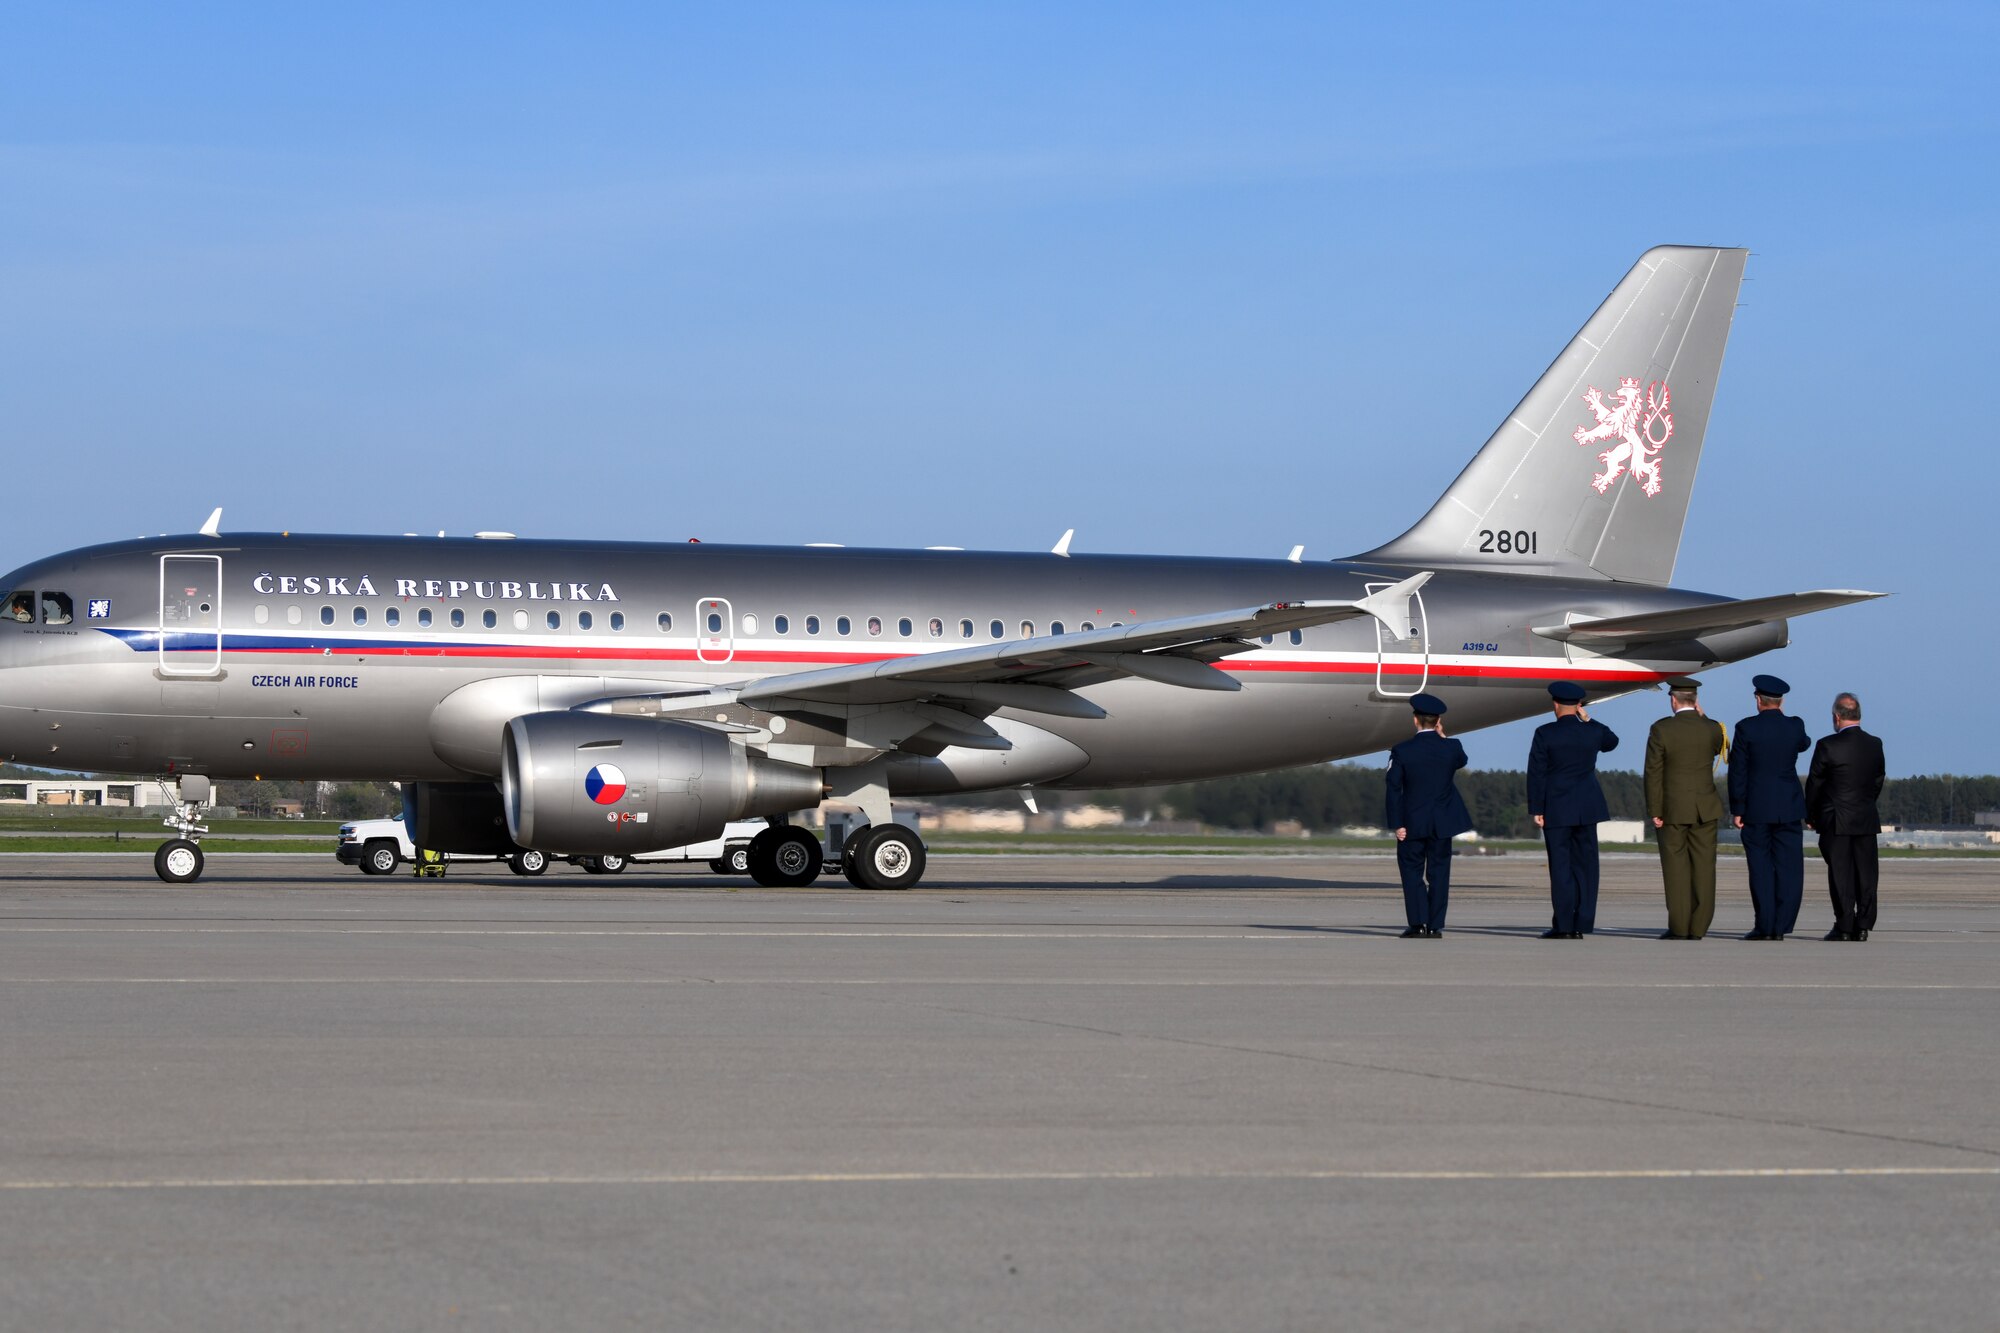 U.S. Air Force and Czech Republic leadership salute the 2801 Czech Air Force Airbus as it departs during the dignified transfer of Brigadier Gen. František Moravec at Joint Base Andrews, Md., April 25, 2022.